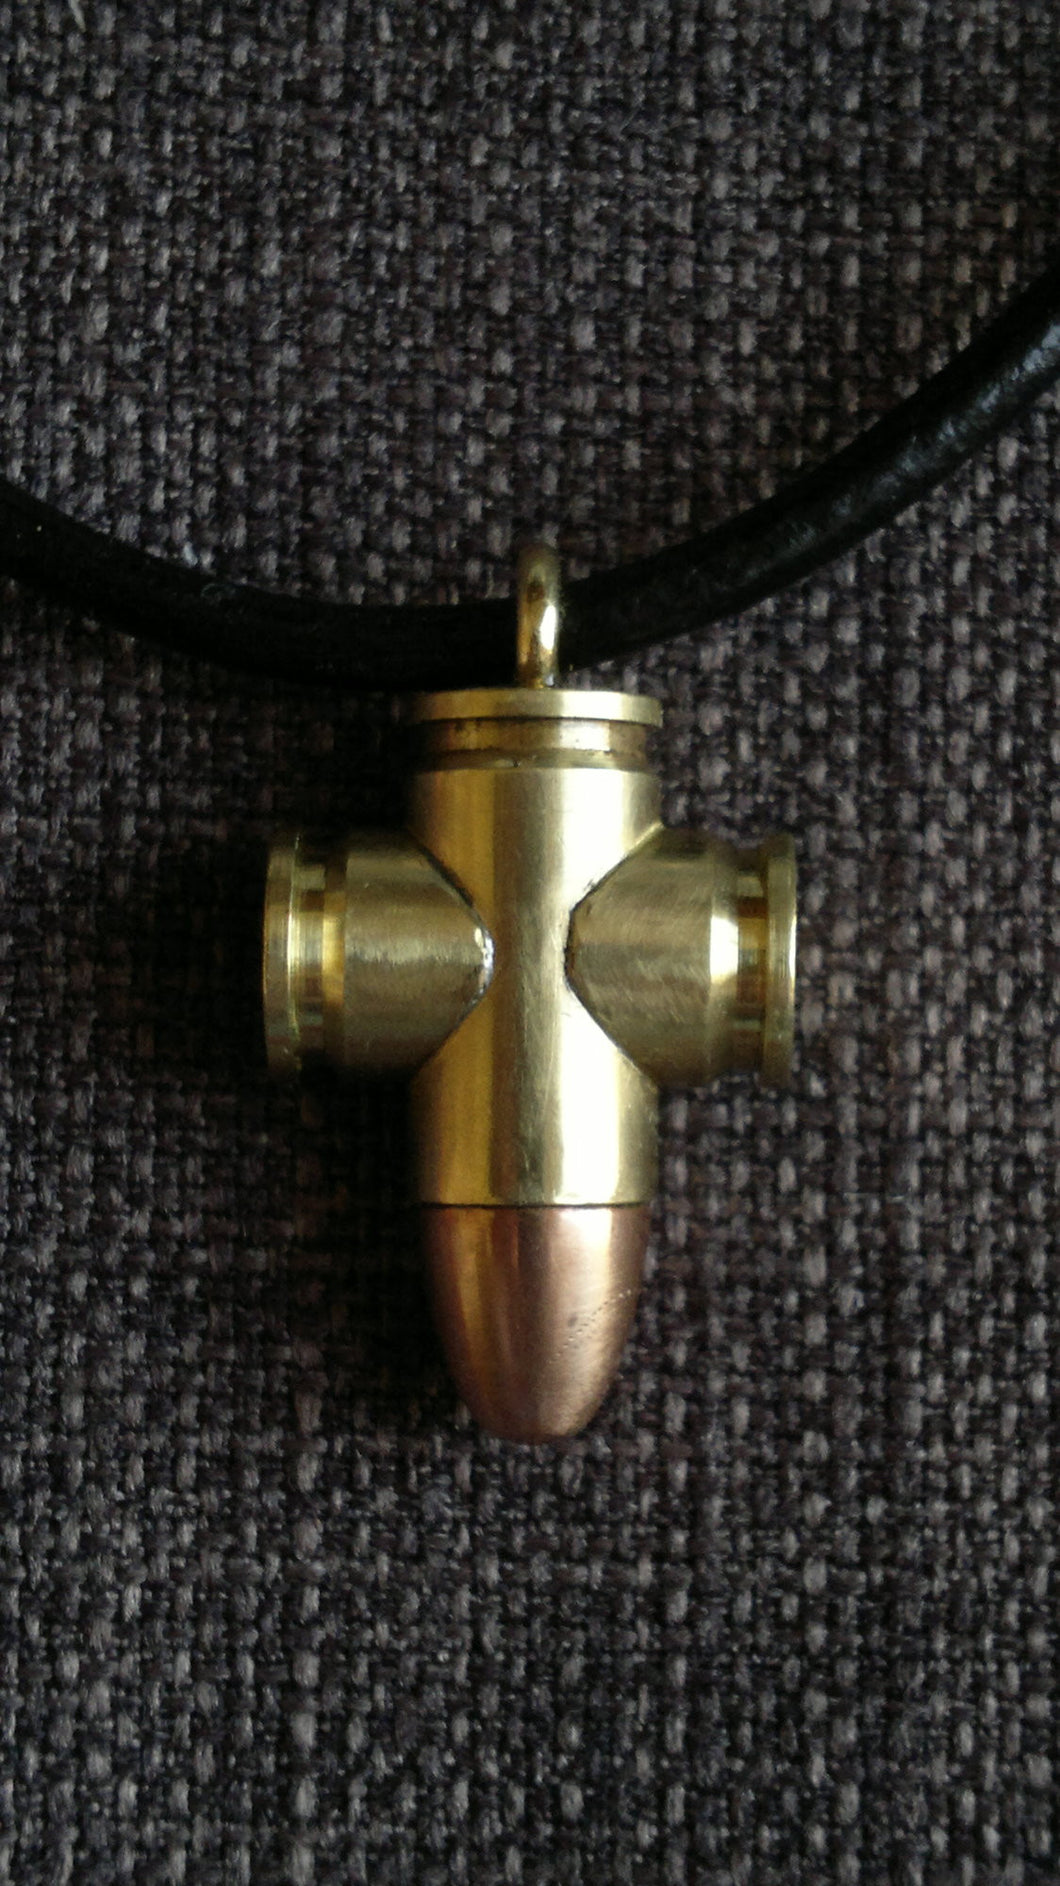 Real 9mm Bullet pendant necklace crucifix cross Christian goth punk